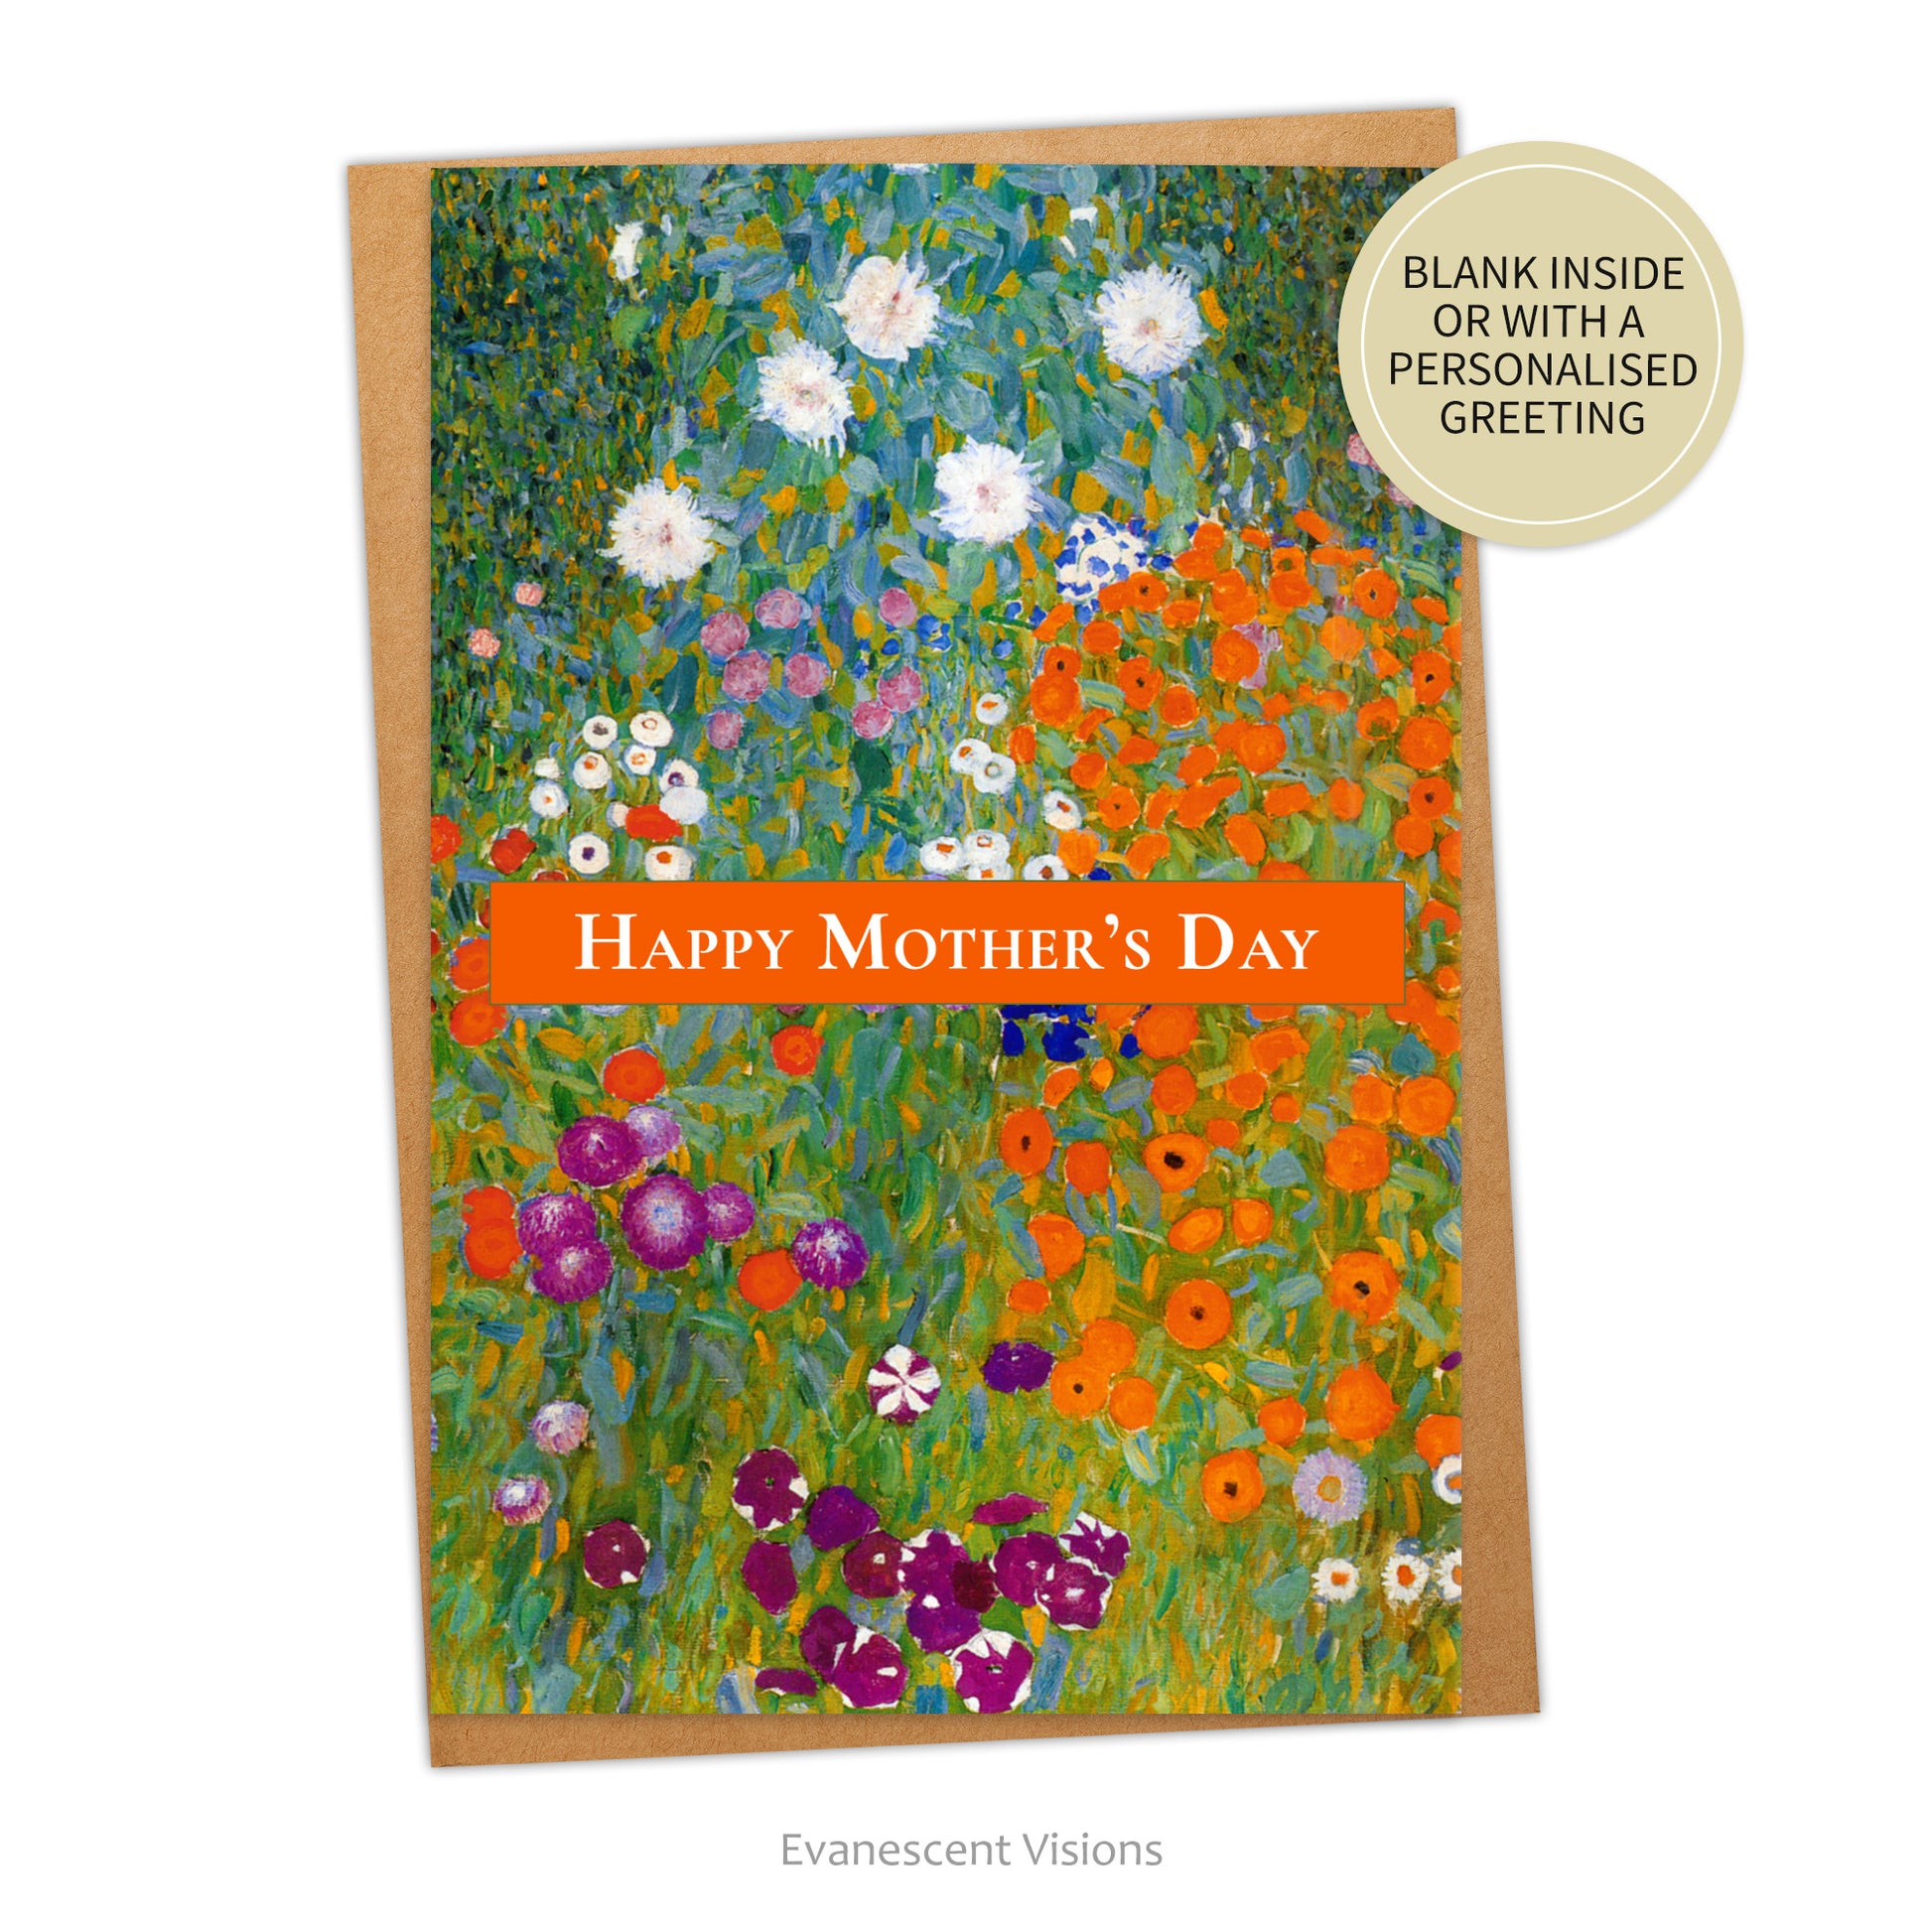 A Mother's Day card with flowers from Gustav Klimt's Bauerngarten and 'Happy Mother's Day' banner across front of card. Brown envelope behind card. Sticker says 'Blank inside or with a personalised greeting.'